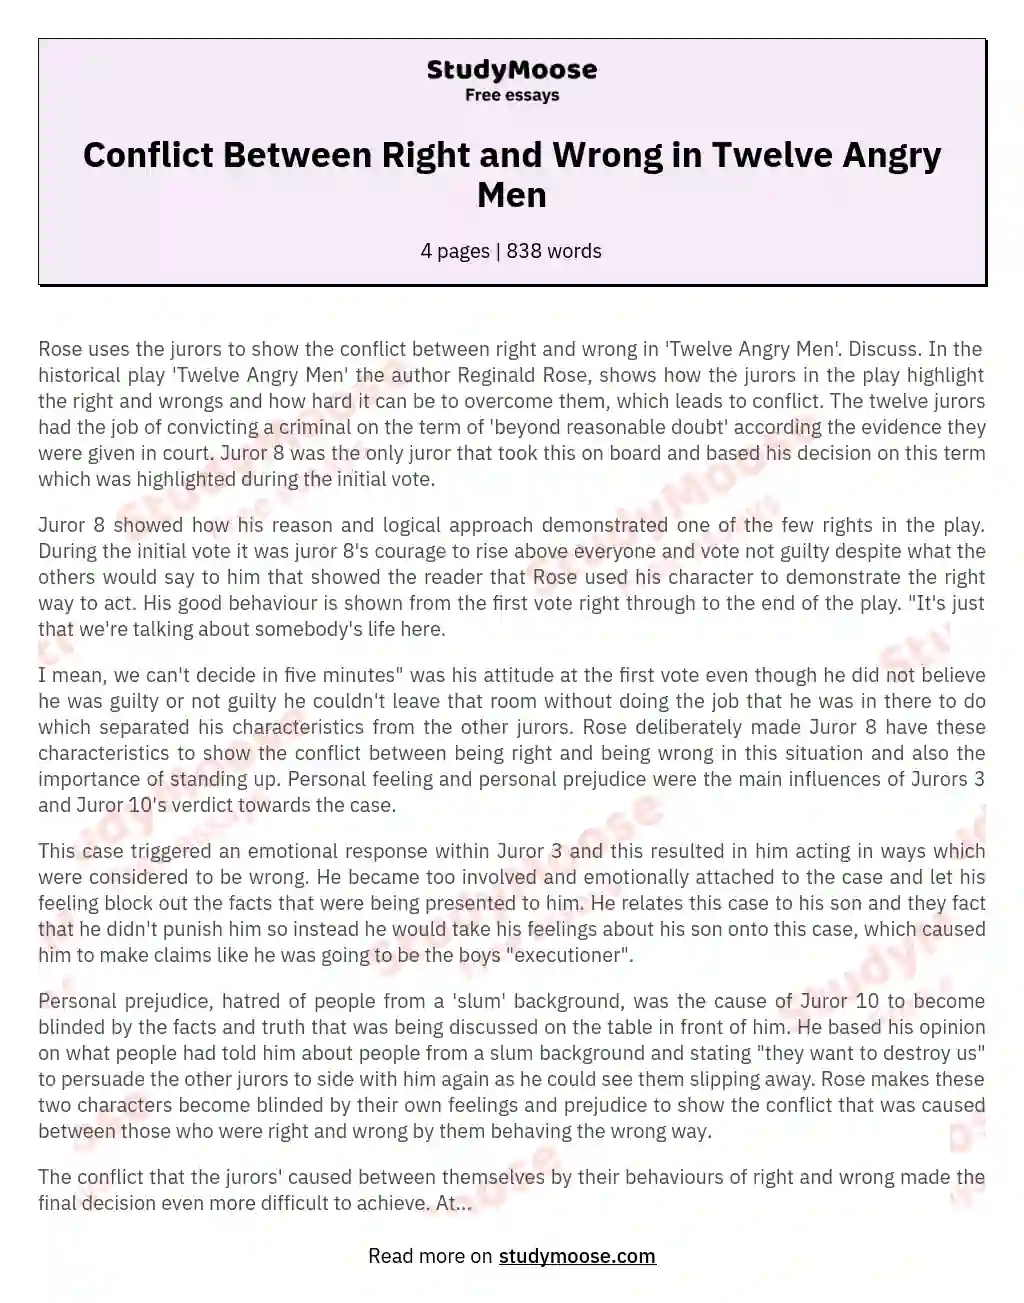 Conflict Between Right and Wrong in Twelve Angry Men essay